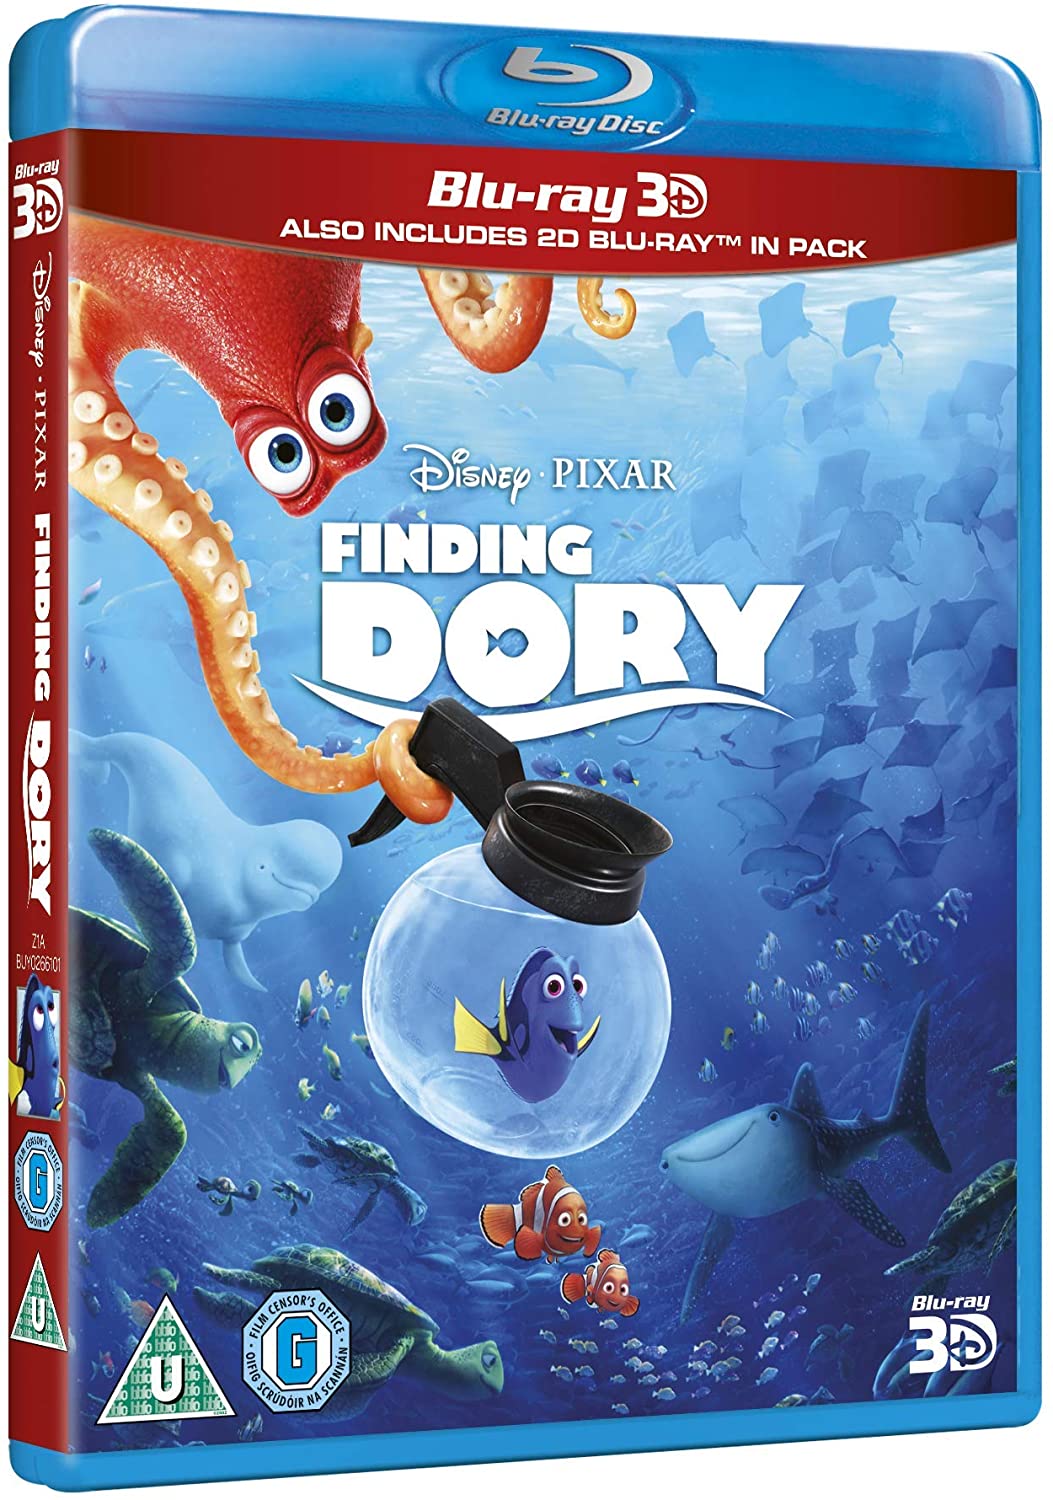 Dory finden [Blu-ray 3D] [2017]